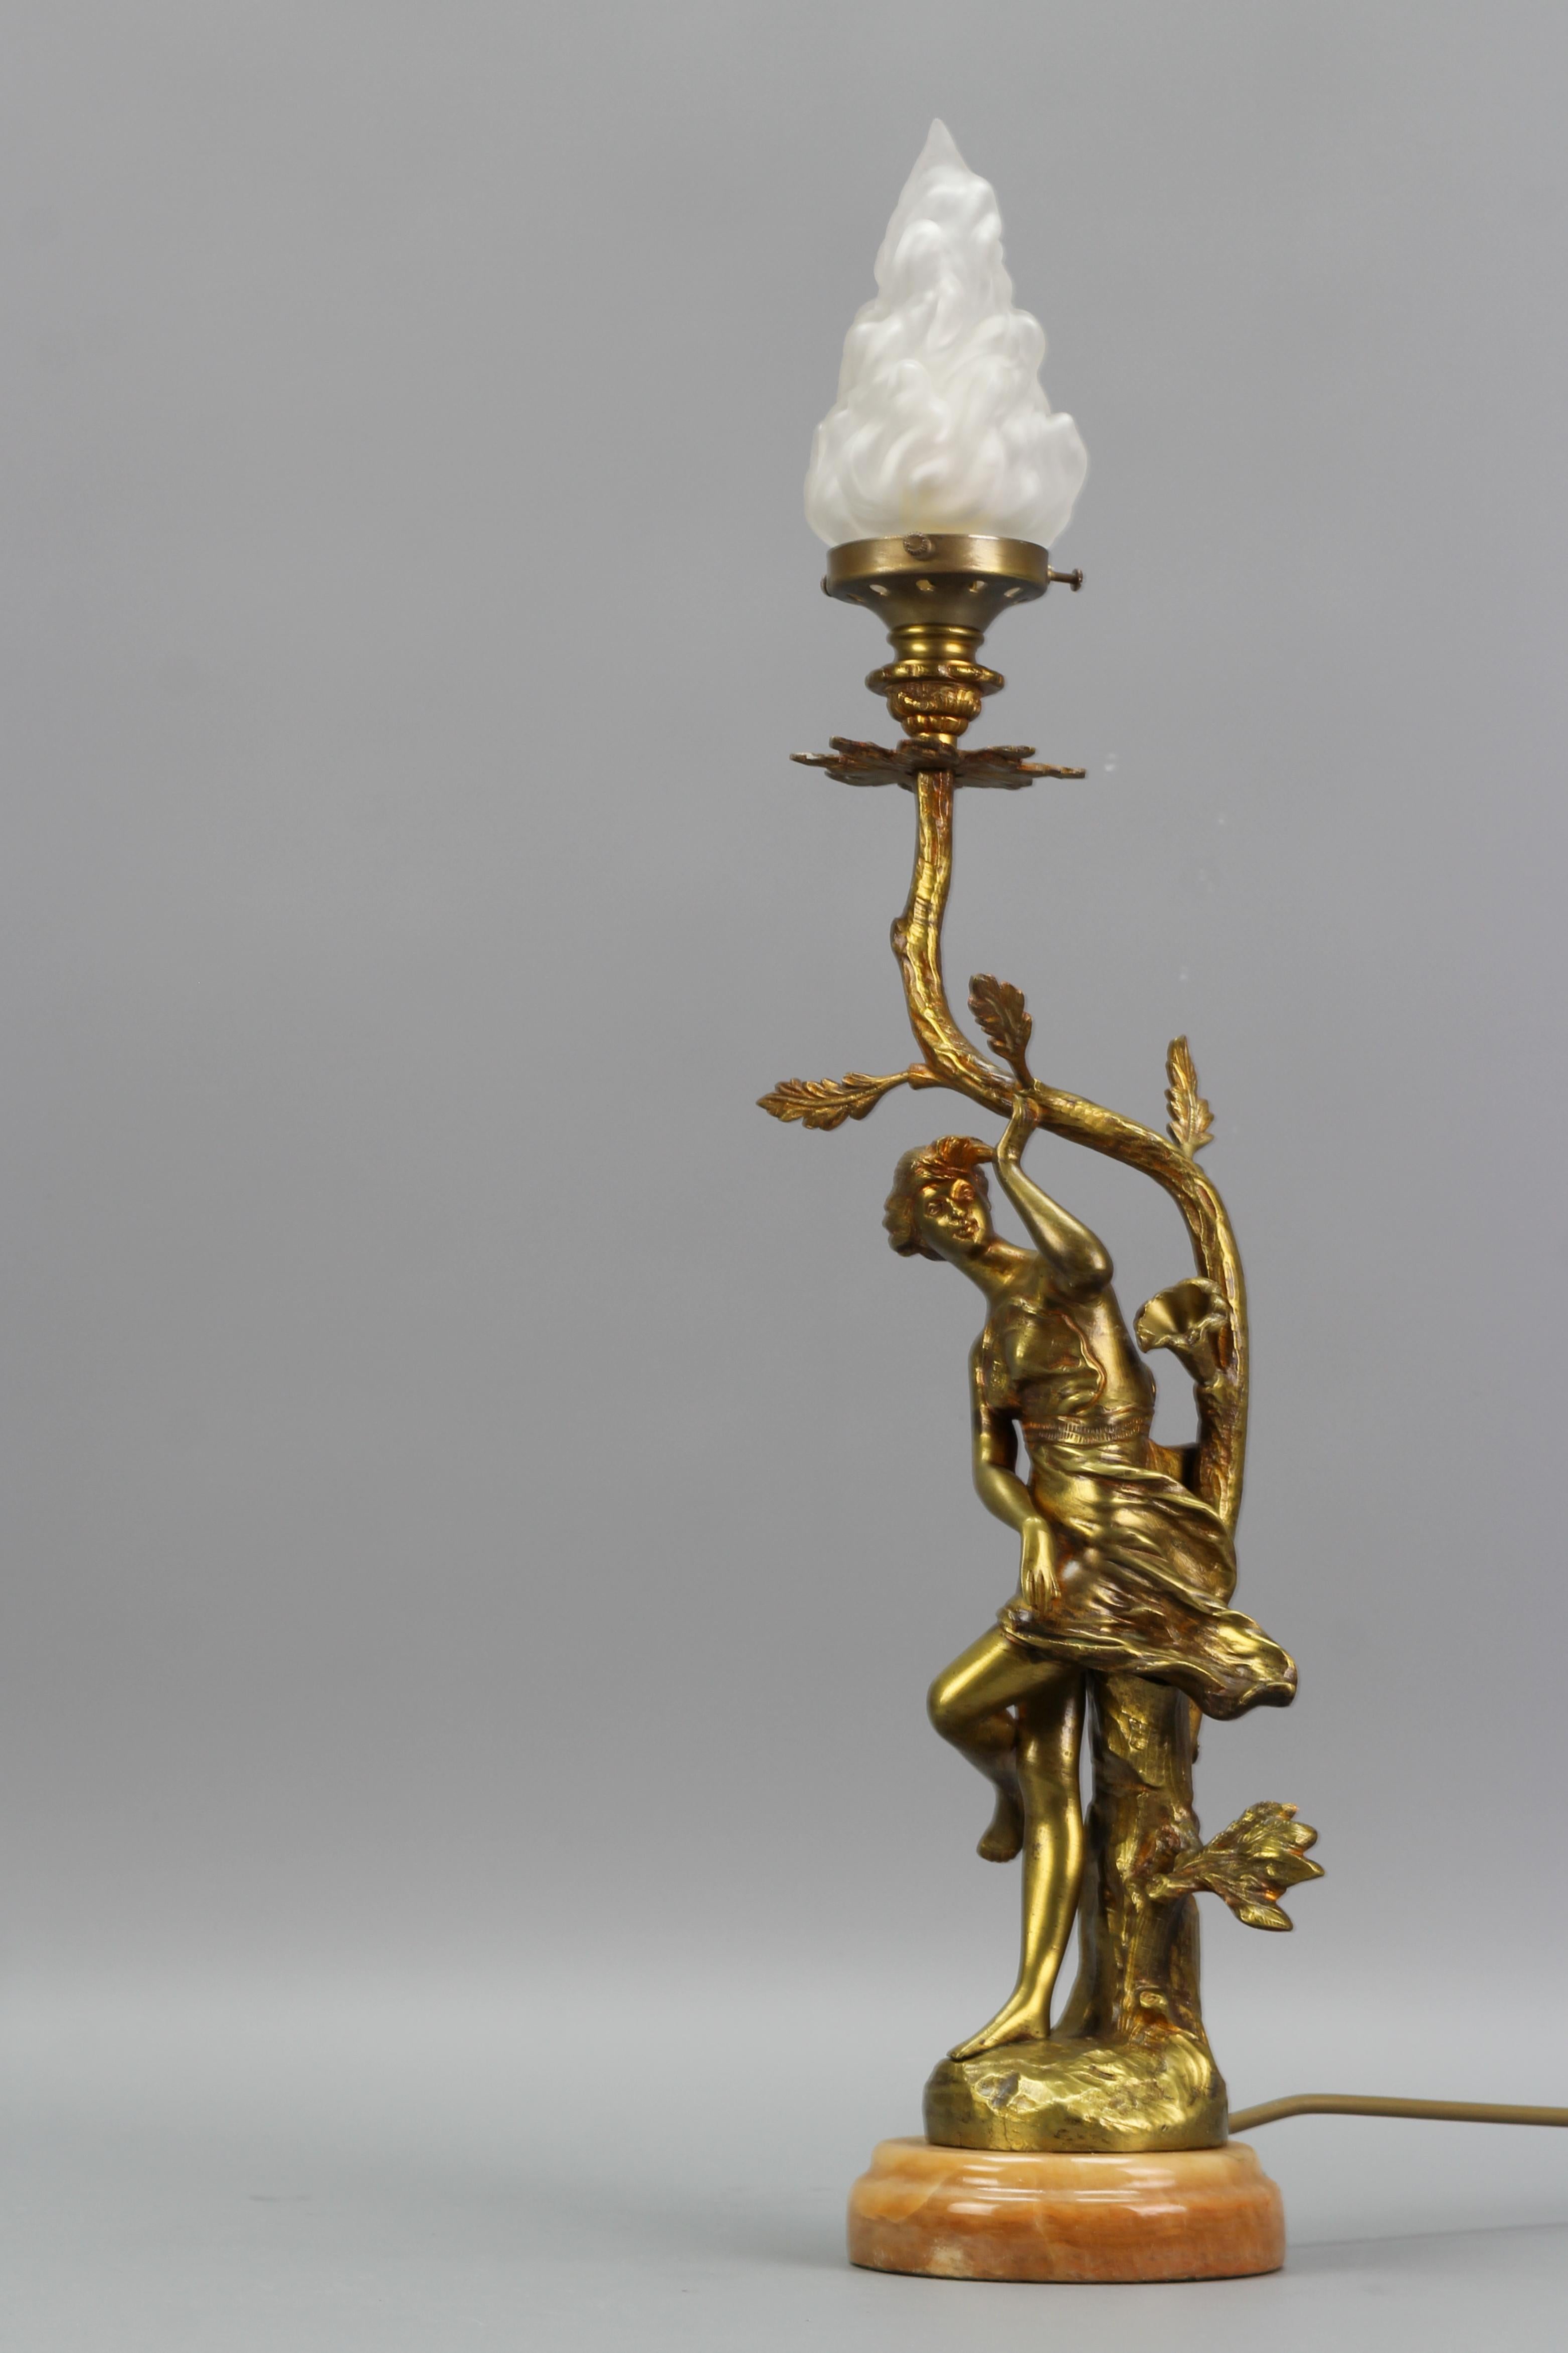 French Art Nouveau Style bronze, white glass, and onyx figural table lamp from circa the 1930s.
A beautiful French Art Nouveau style bronze table lamp, wired for single light; flame-shaped white frosted glass lampshade with a sculptural female